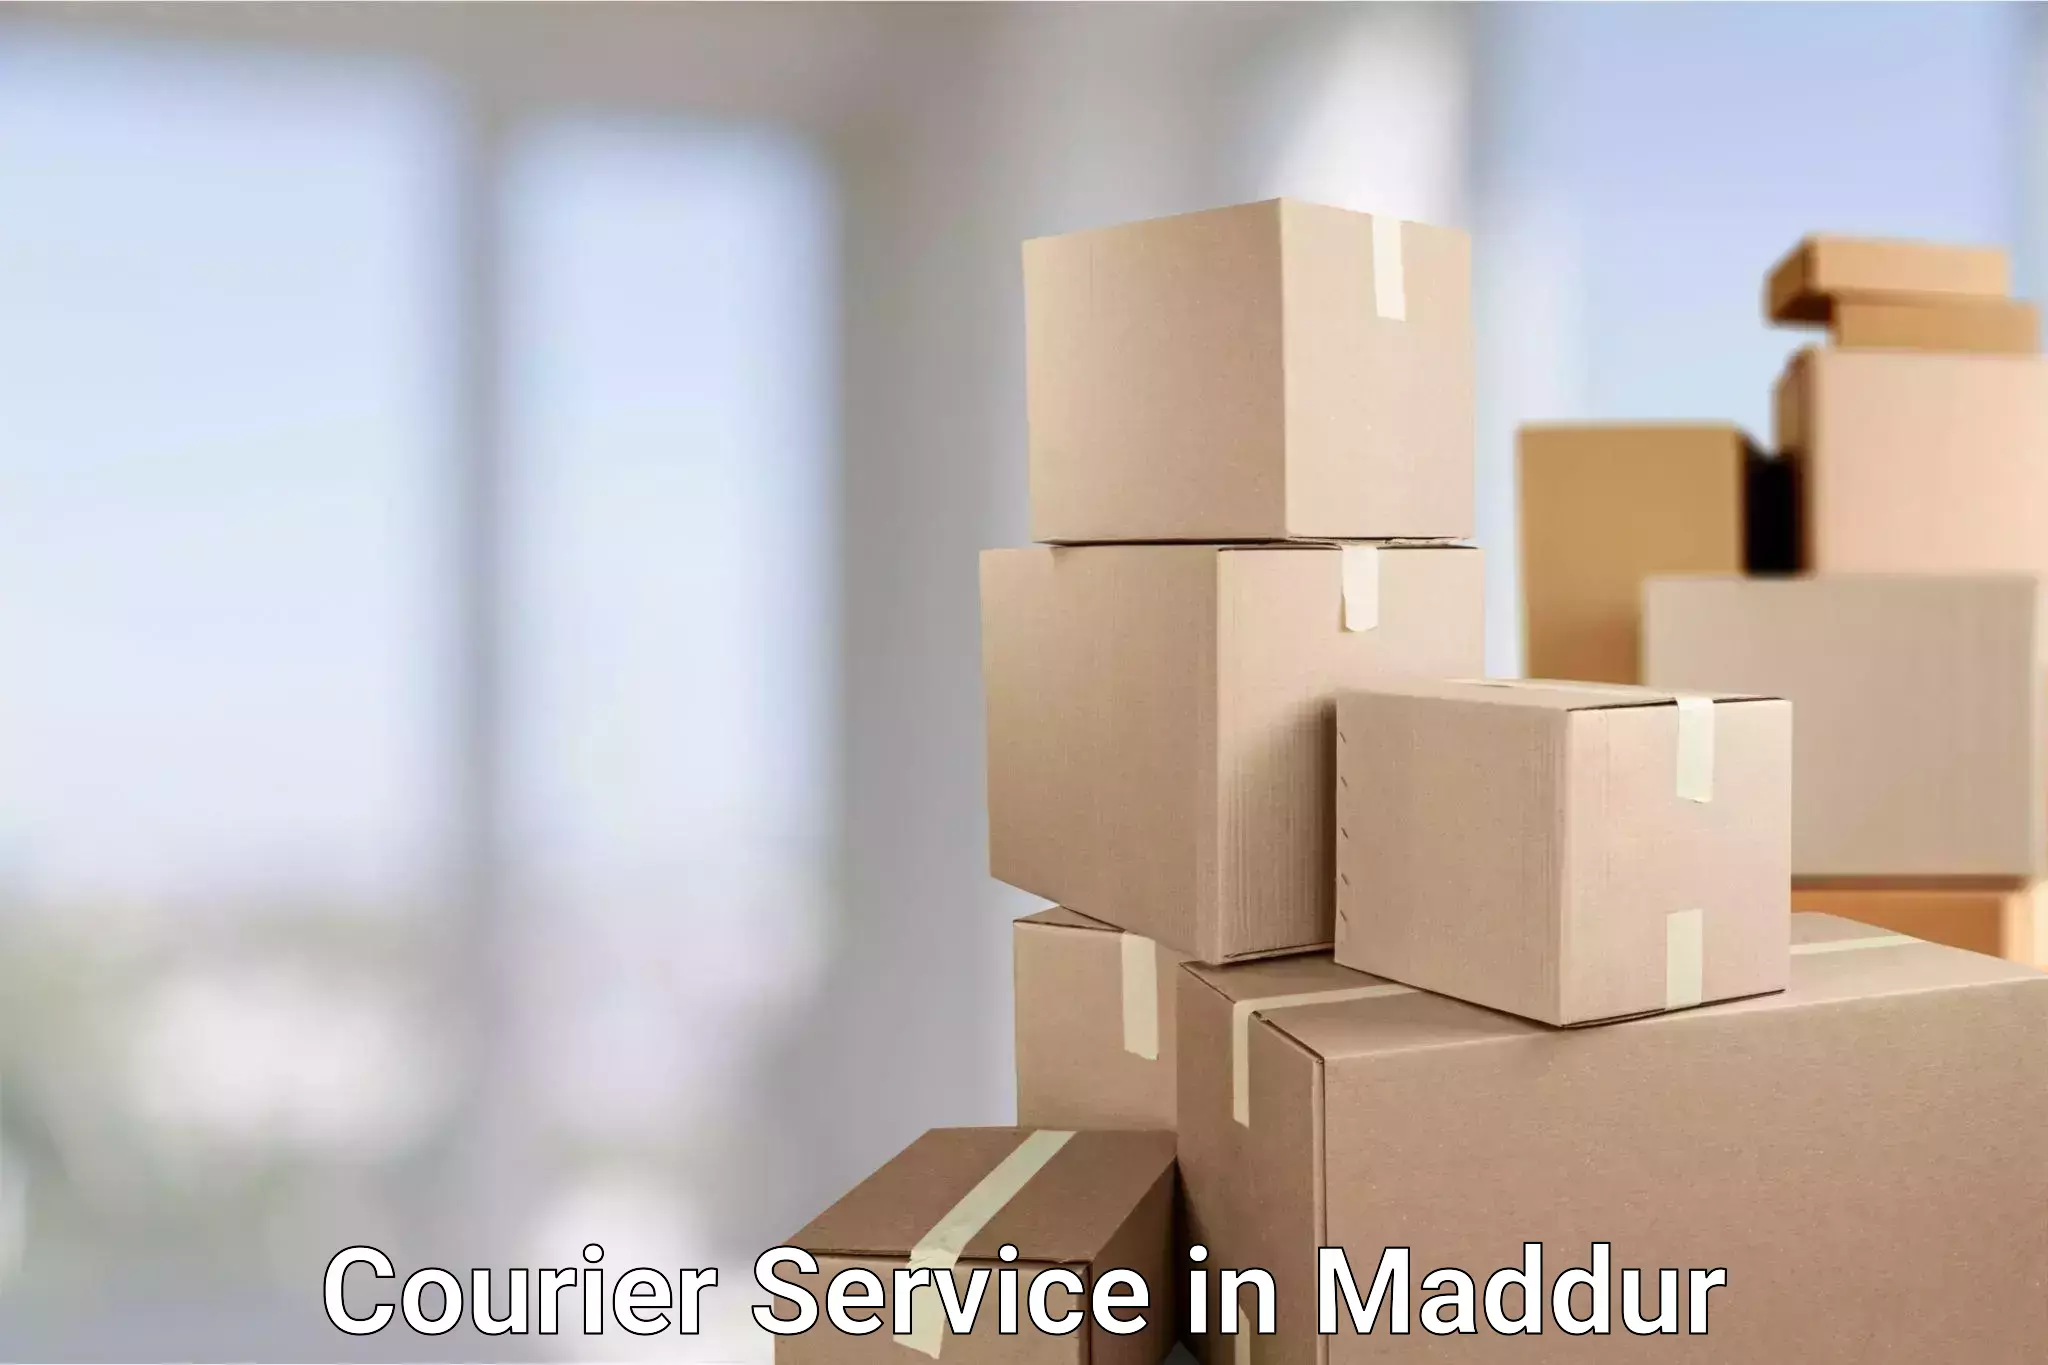 Streamlined shipping process in Maddur